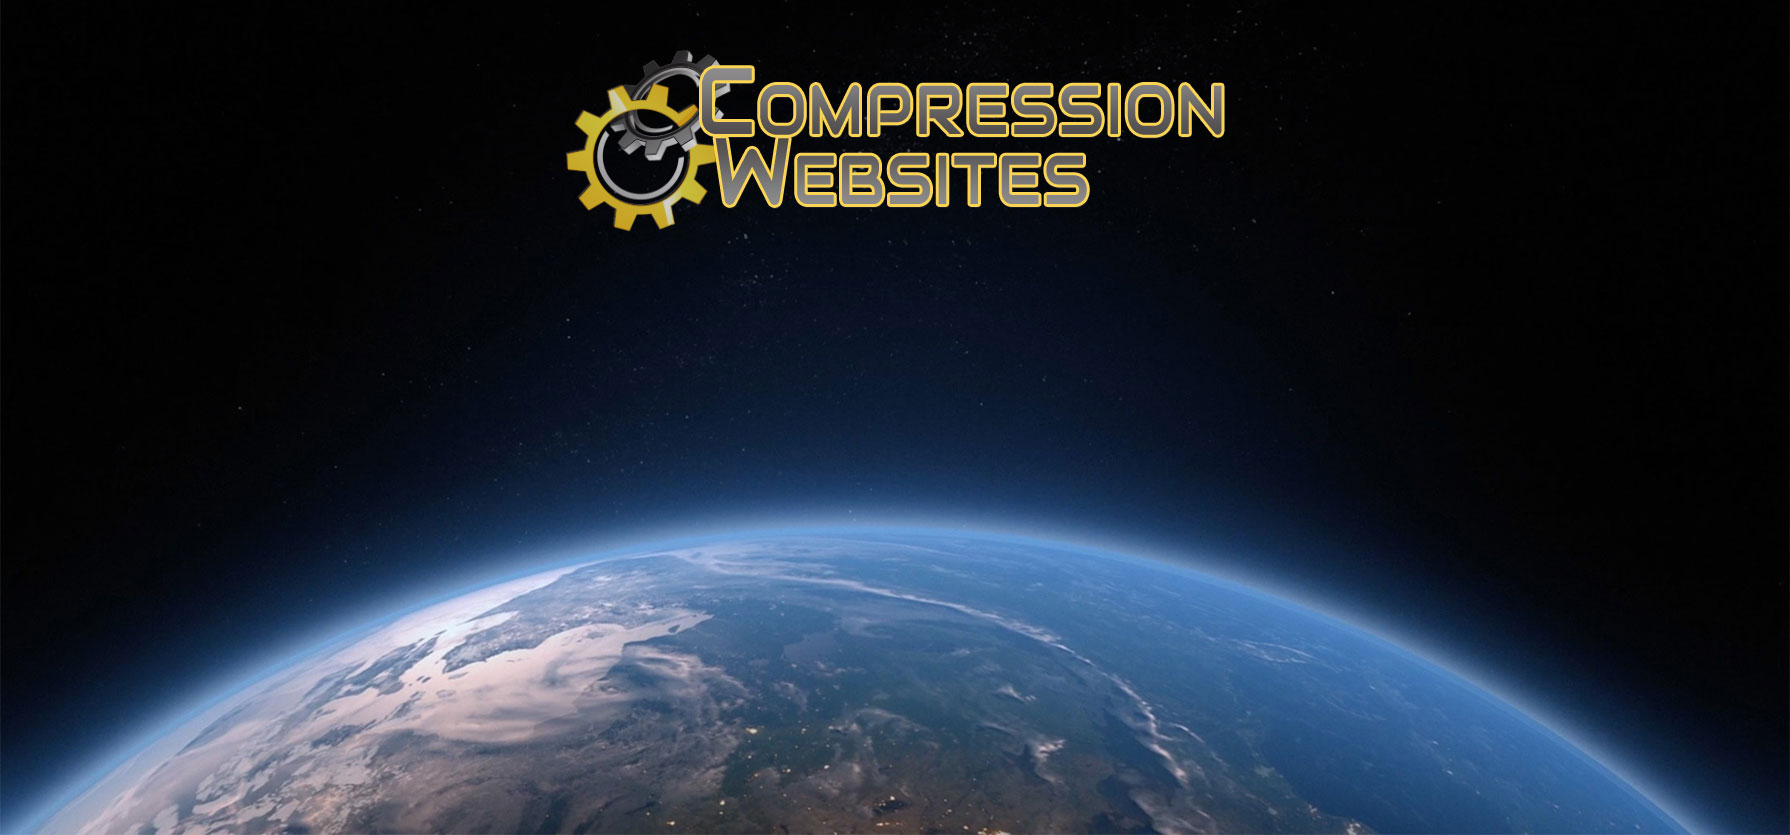 Compression is my world